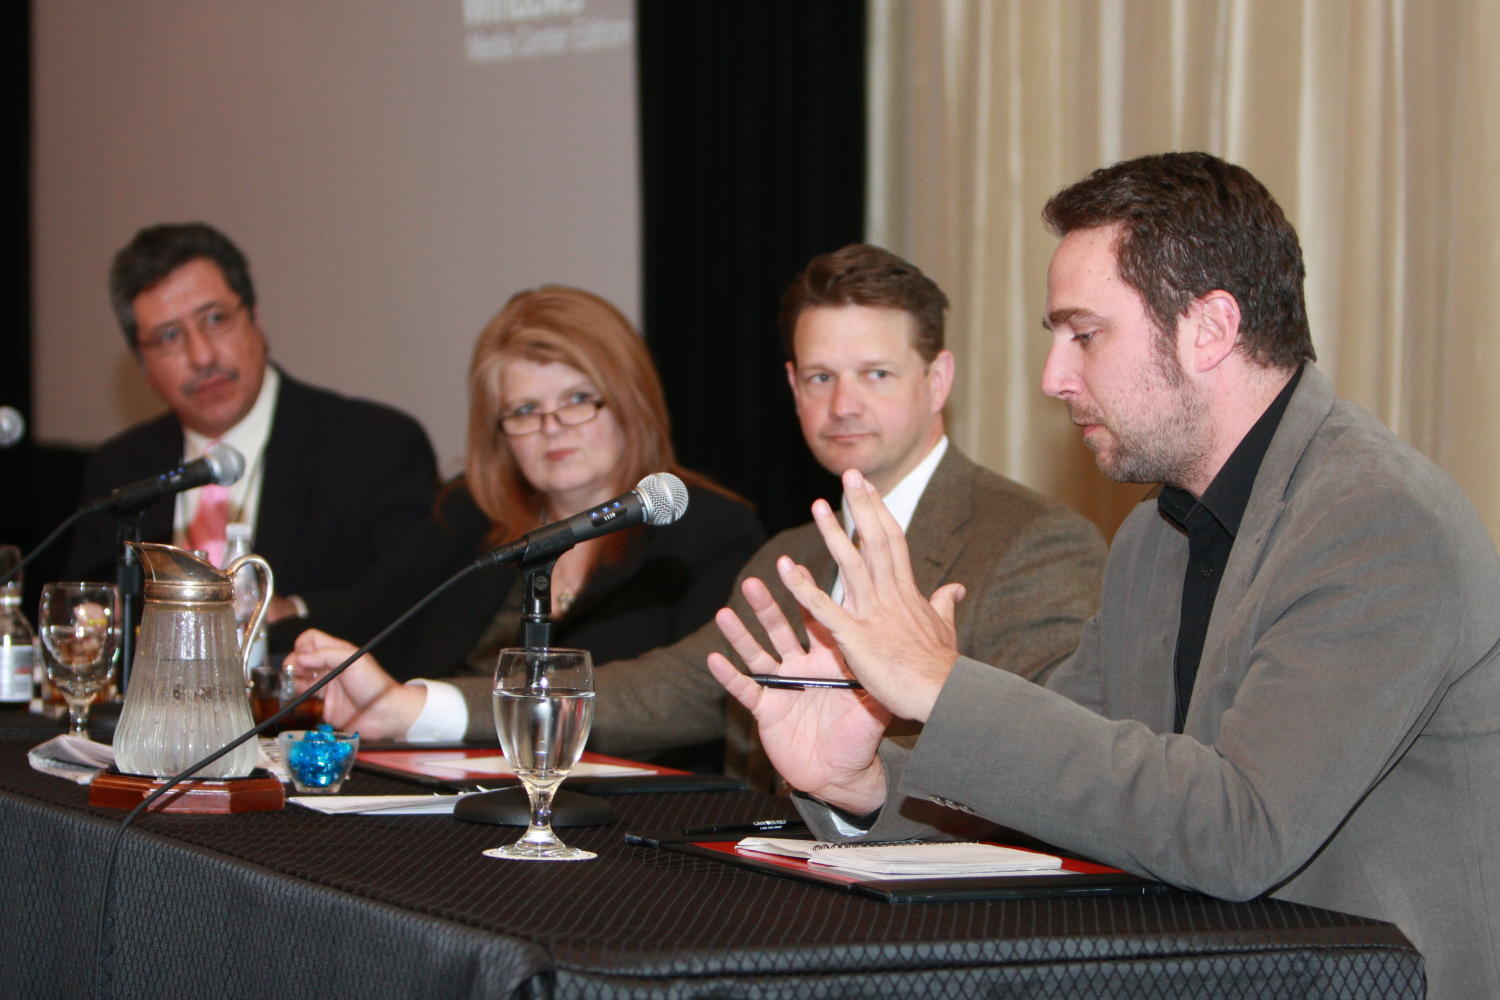 [Guest panelists at TDNA conference], Photograph of unidentified guest panelist attending the 2010 Texas Daily Newspaper Association annual meeting held in Houston, Texas. The man in the foreground is seen talking into the microphone, using his hands as emphasis as he speaks, while his guest panelists watch him., 